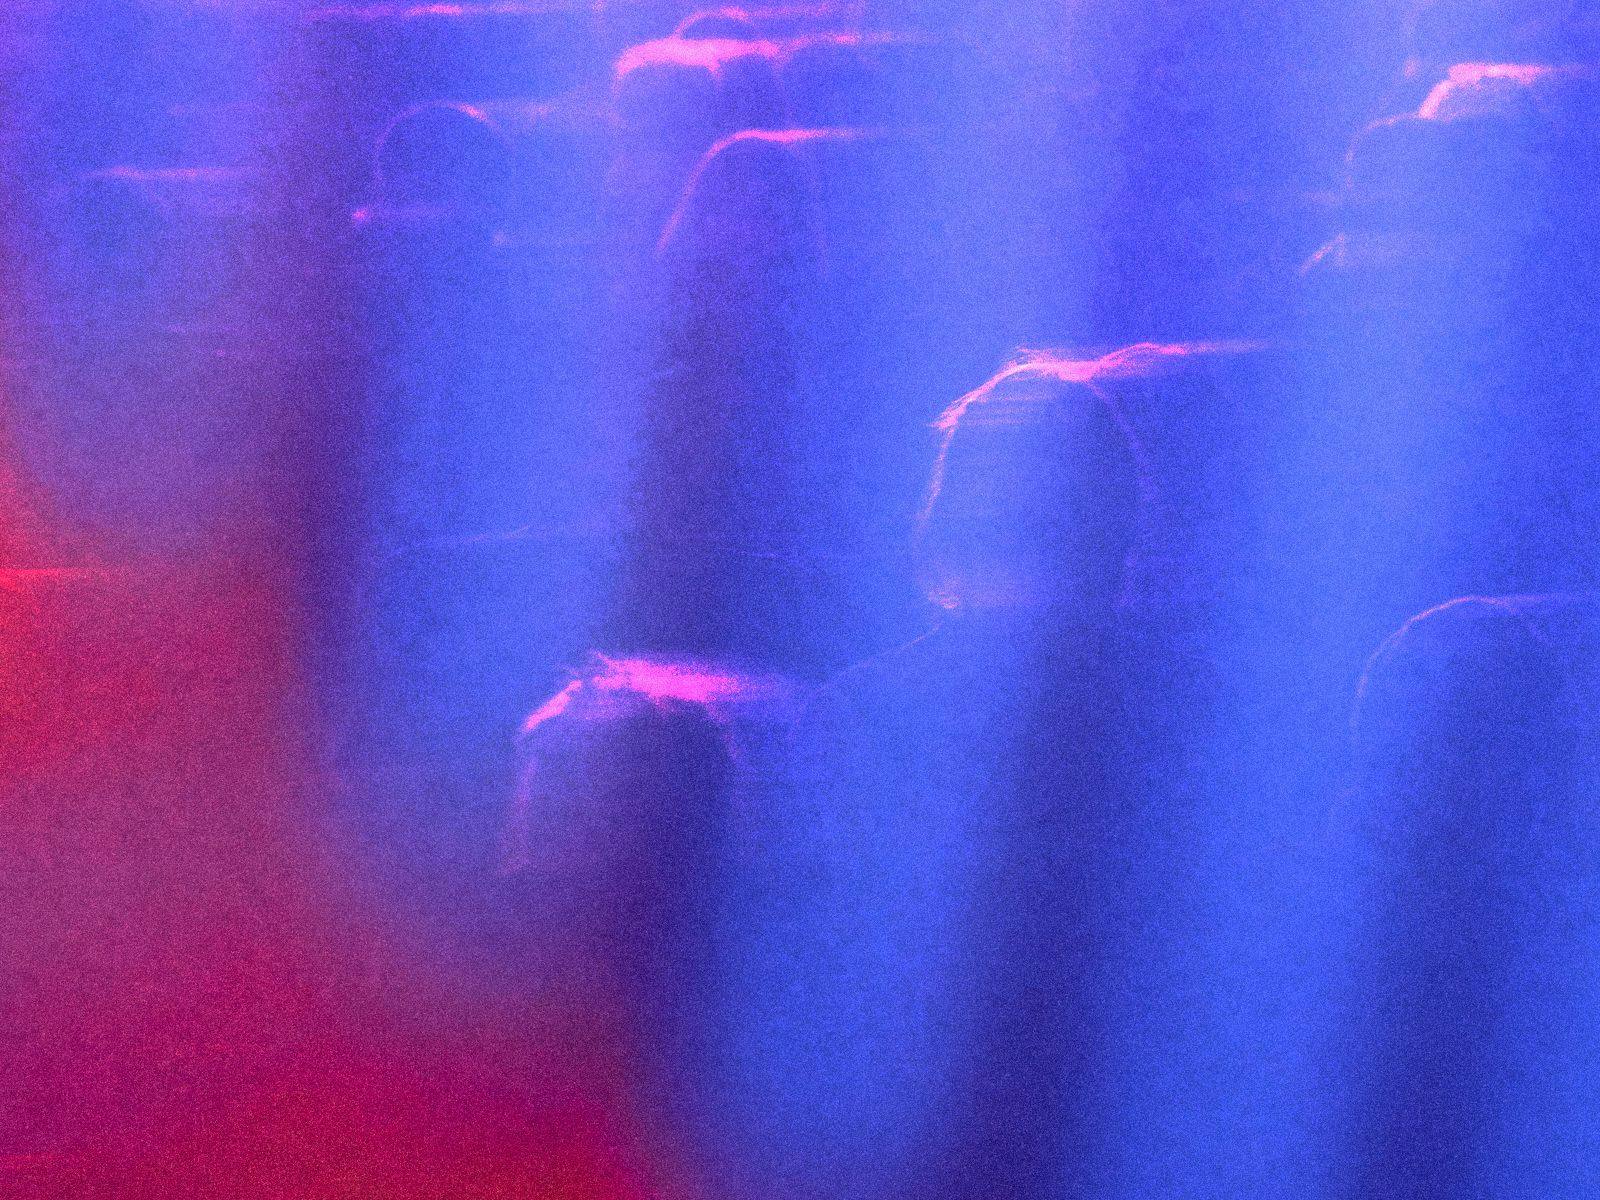 An abstract overlayed image of blurry people, shapes and colours.